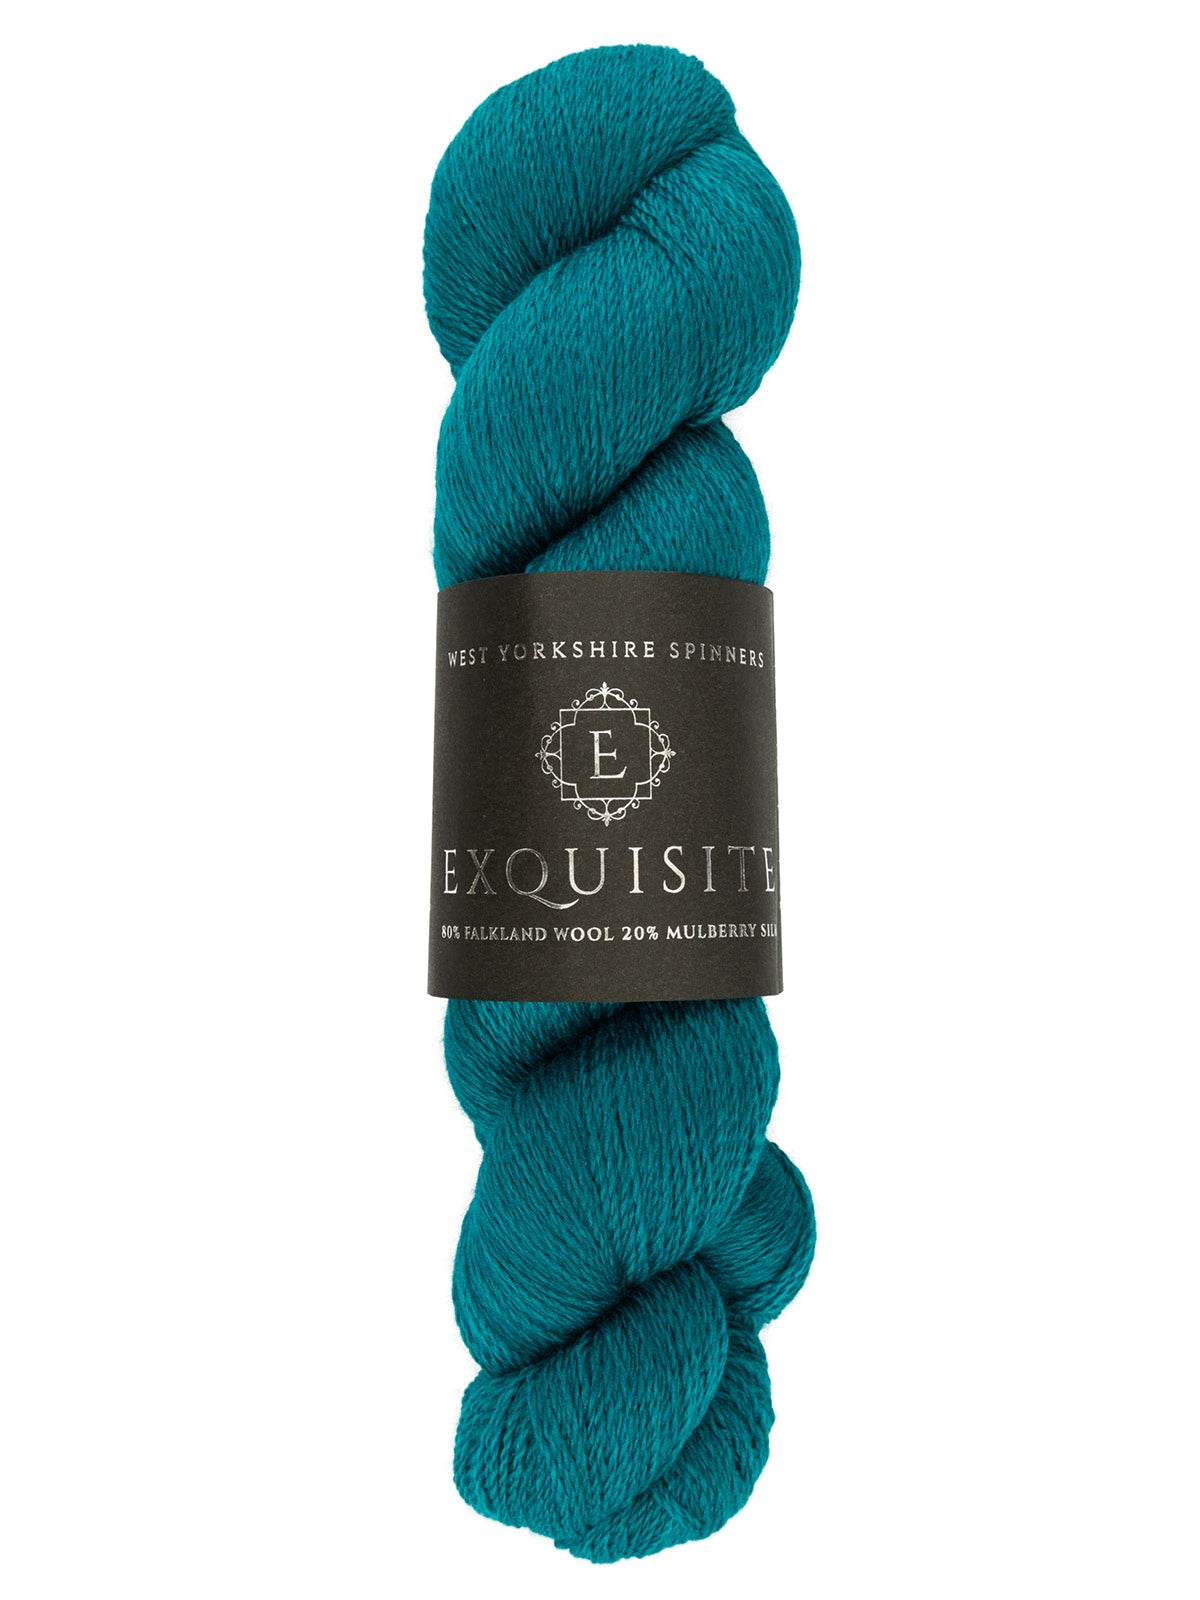 West Yorkshire Spinners Exquiste Lace color teal